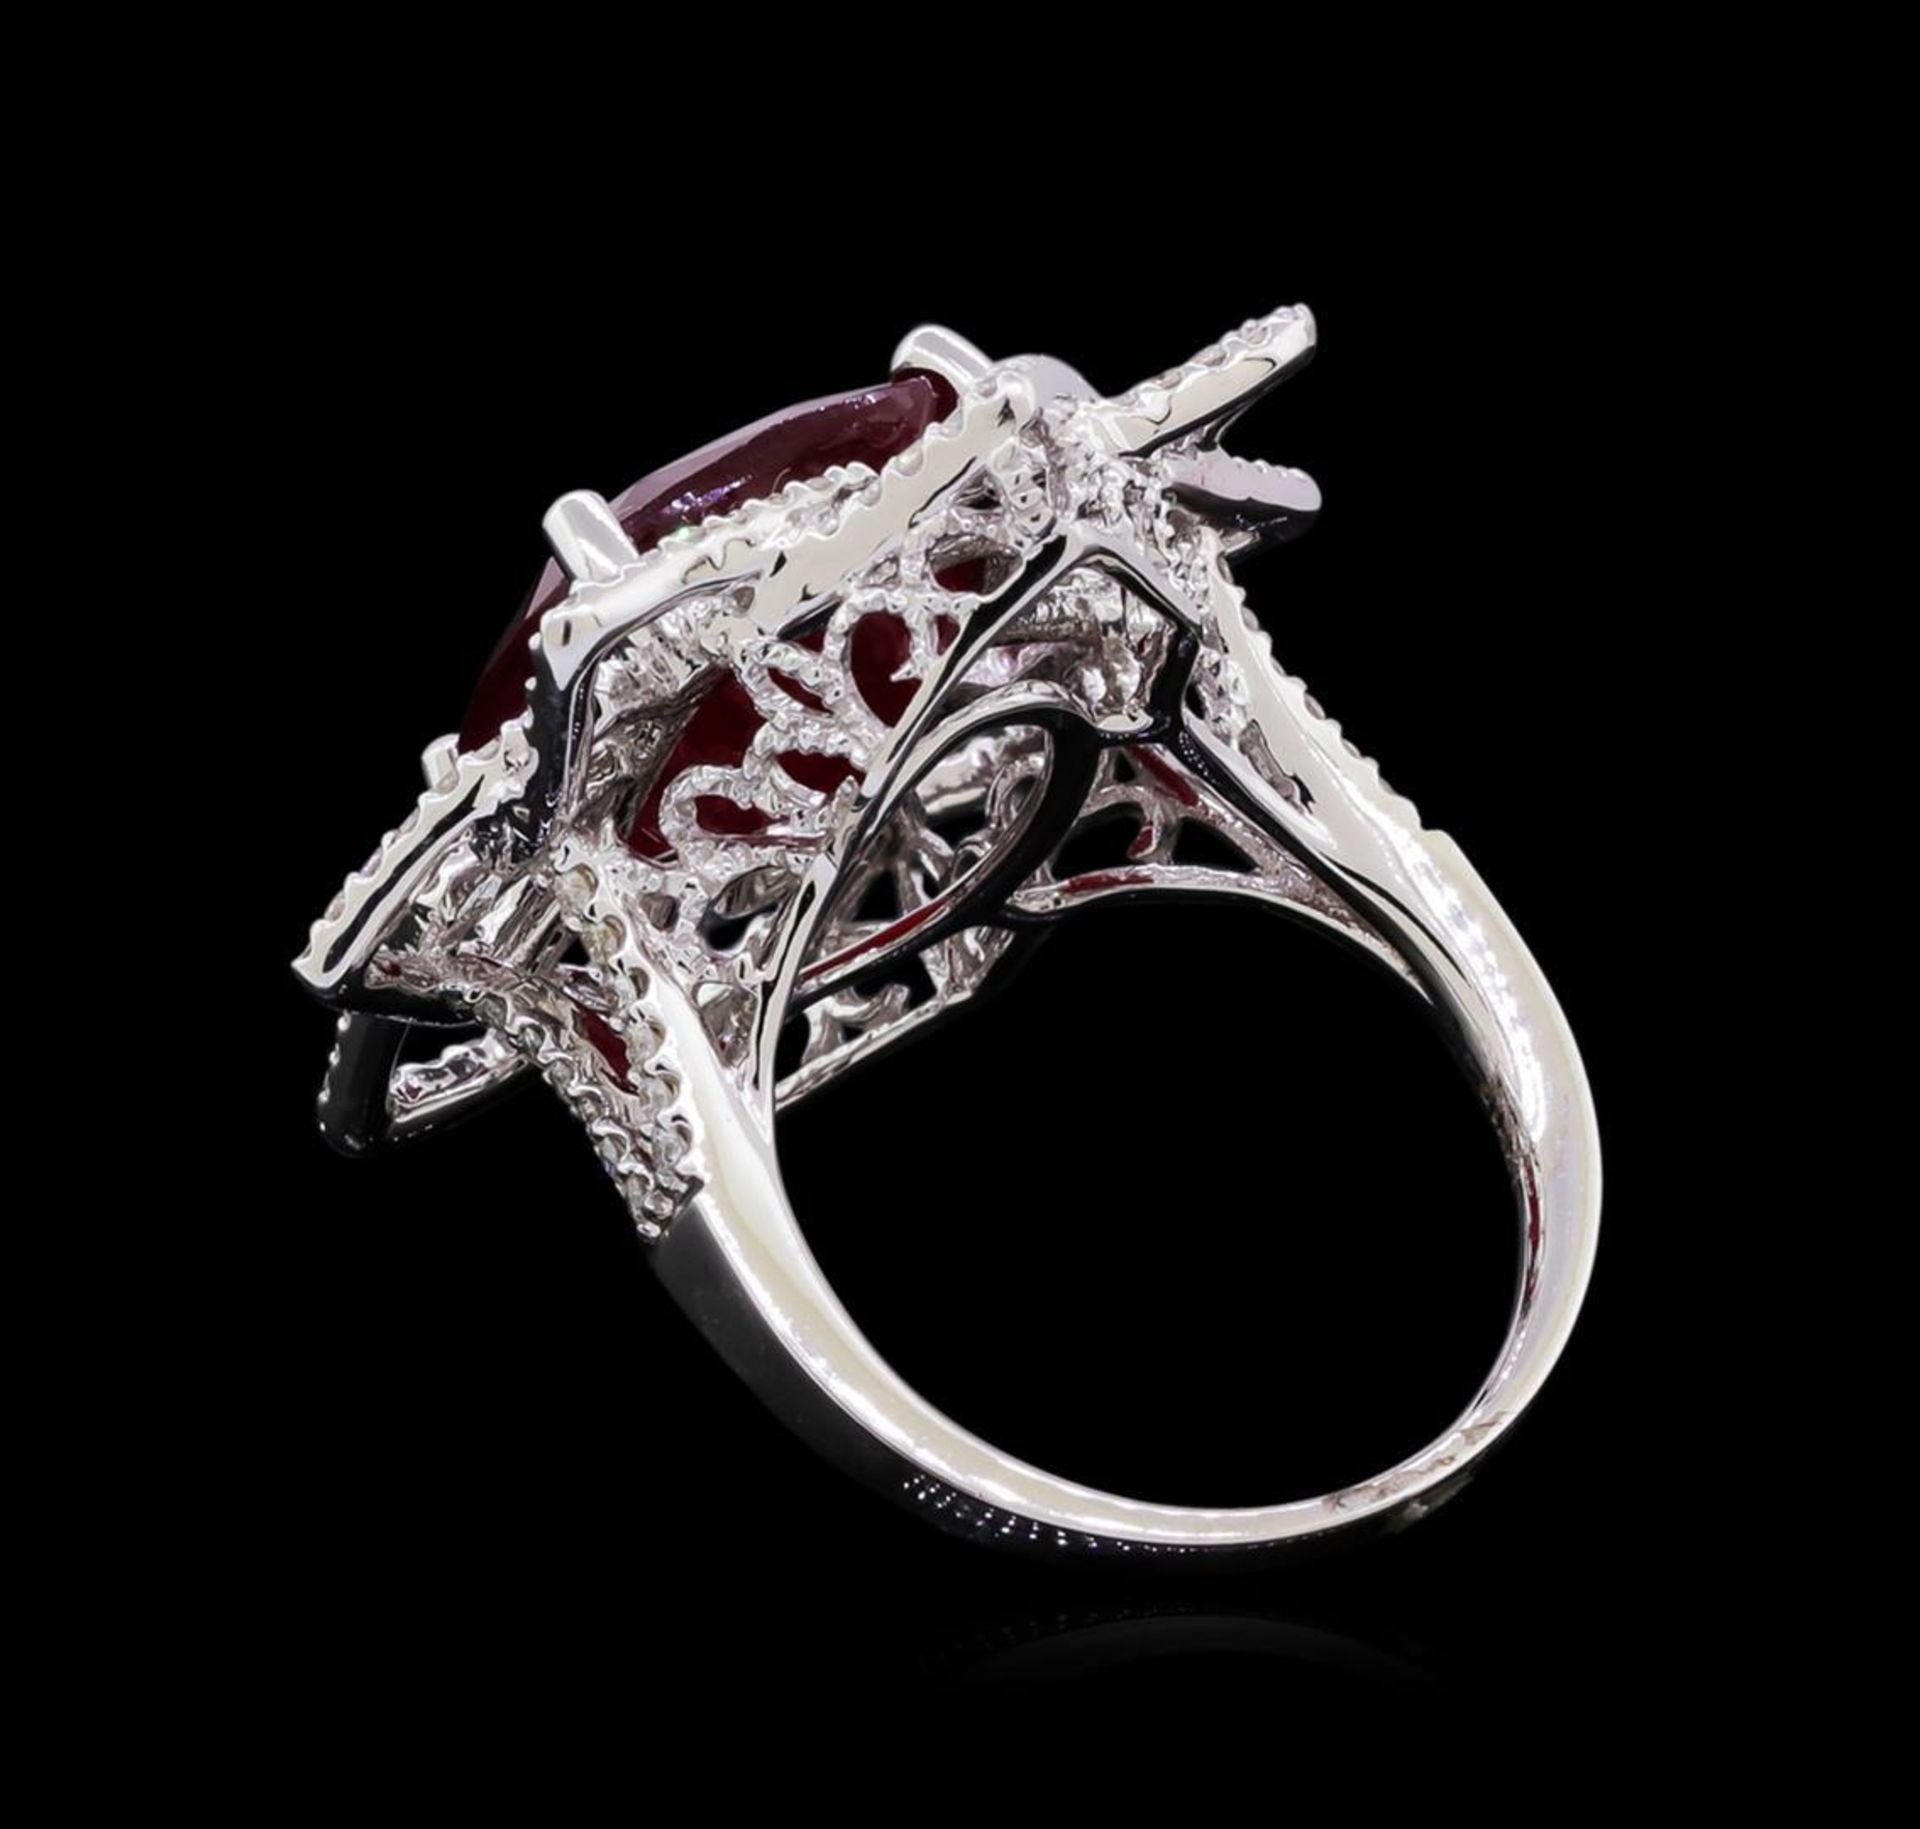 14KT White Gold 11.02 ctw Ruby and Diamond Ring - Image 3 of 5